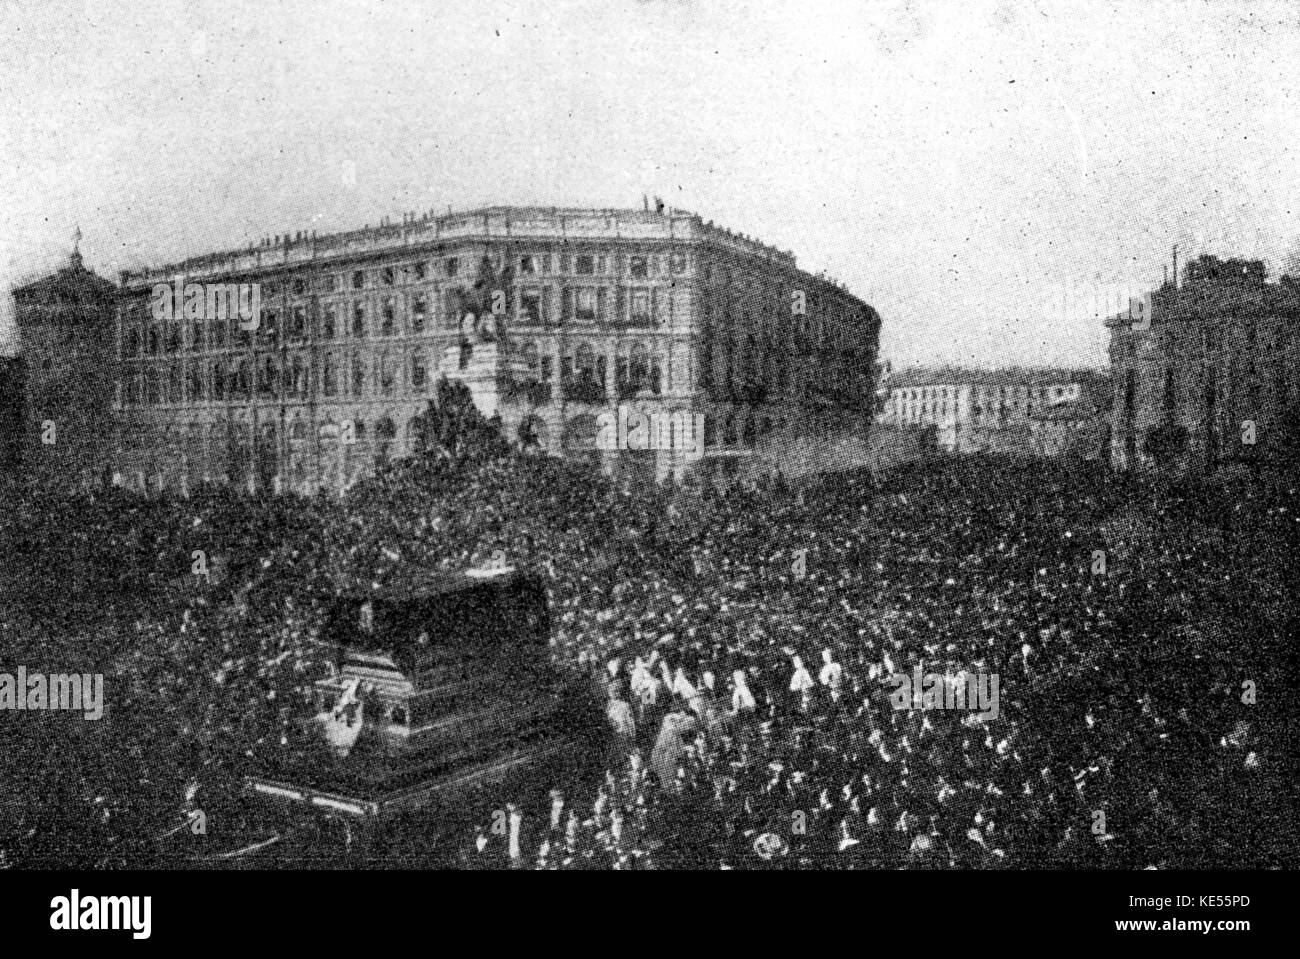 Giuseppe Verdi 's body is moved from Cimetero Monumentale to the Casa di Riposo. Crowds at Milan, 27 February 1901. GV: Italian composer,  9 or 10 October 1813 - 27 January 1901. Stock Photo